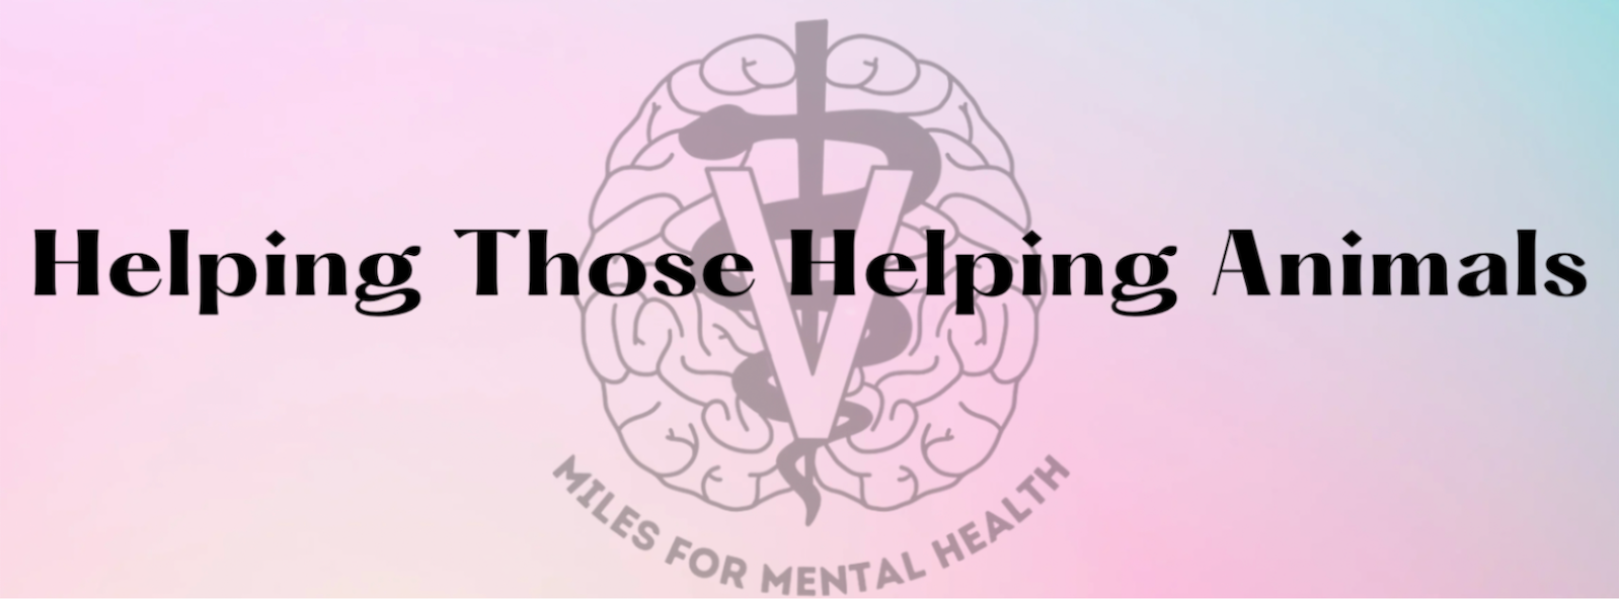 Miles for Mental Health